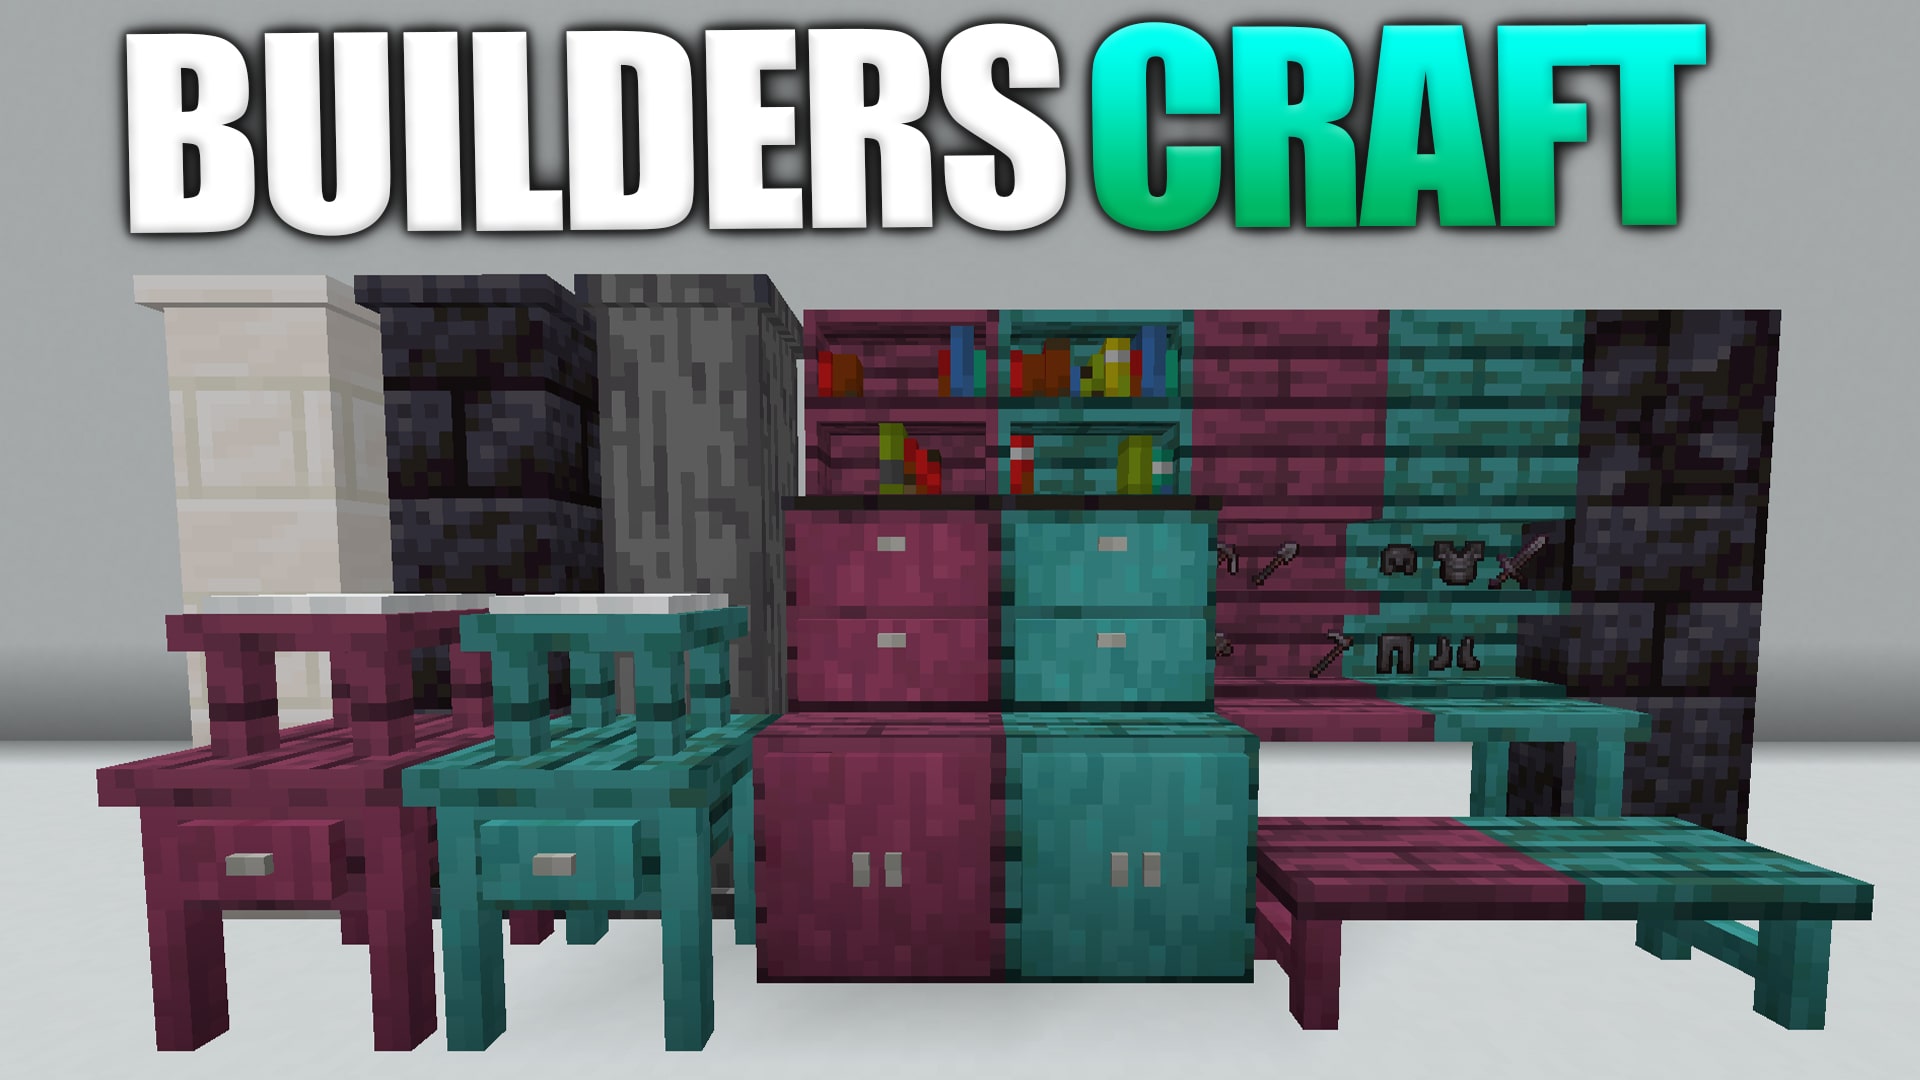 Builders Crafts & Additions